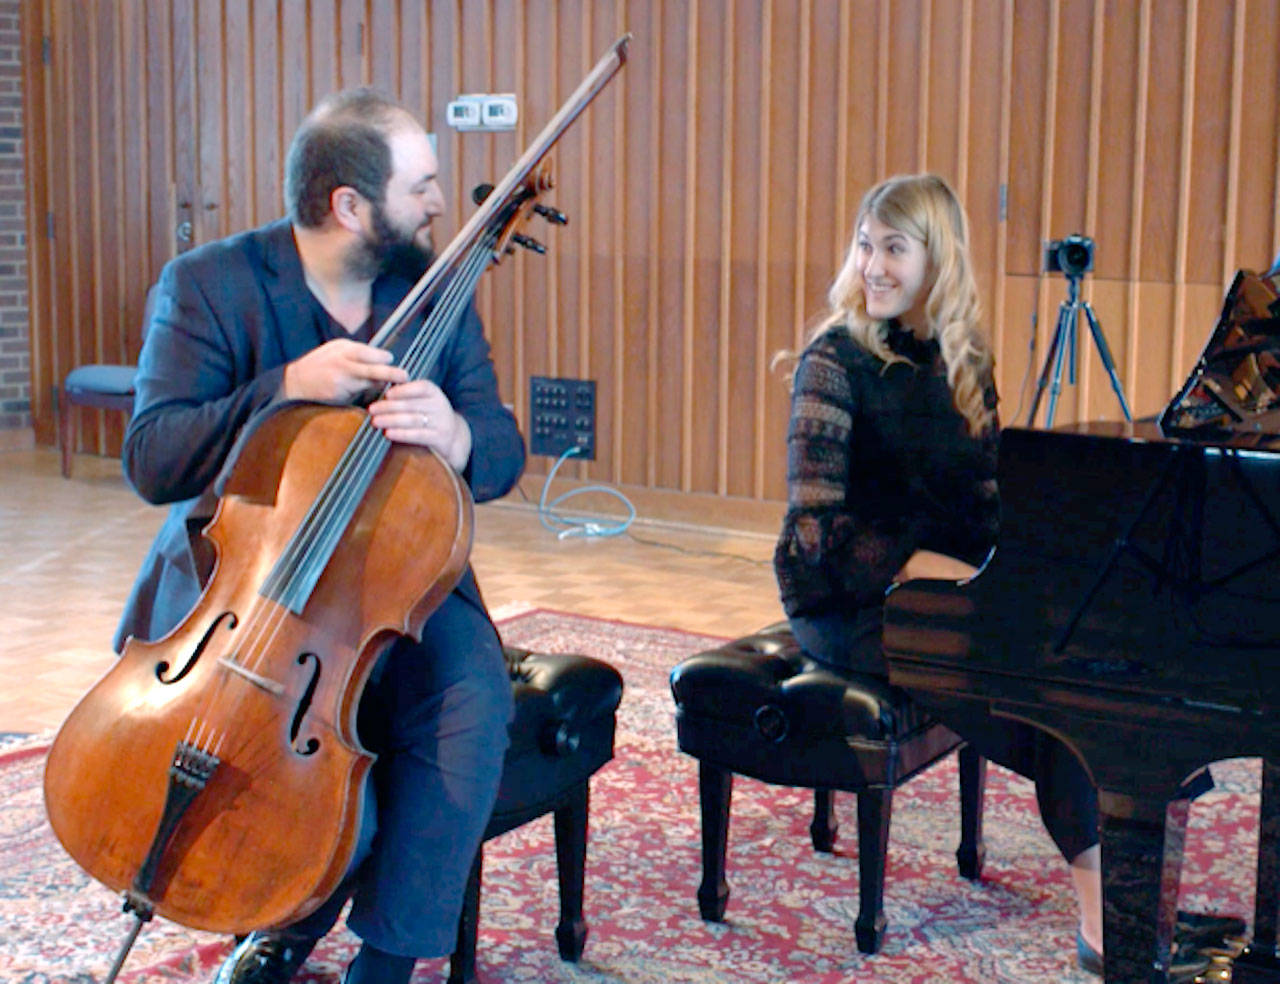 Marika Bournaki and her husband Julian Schwarz, a Port Angeles Symphony guest soloist, together offer a recital of music by Beethoven, Fauré and others this Saturday via the symphony’s YouTube channel. (Photo courtesy of the Port Angeles Symphony)